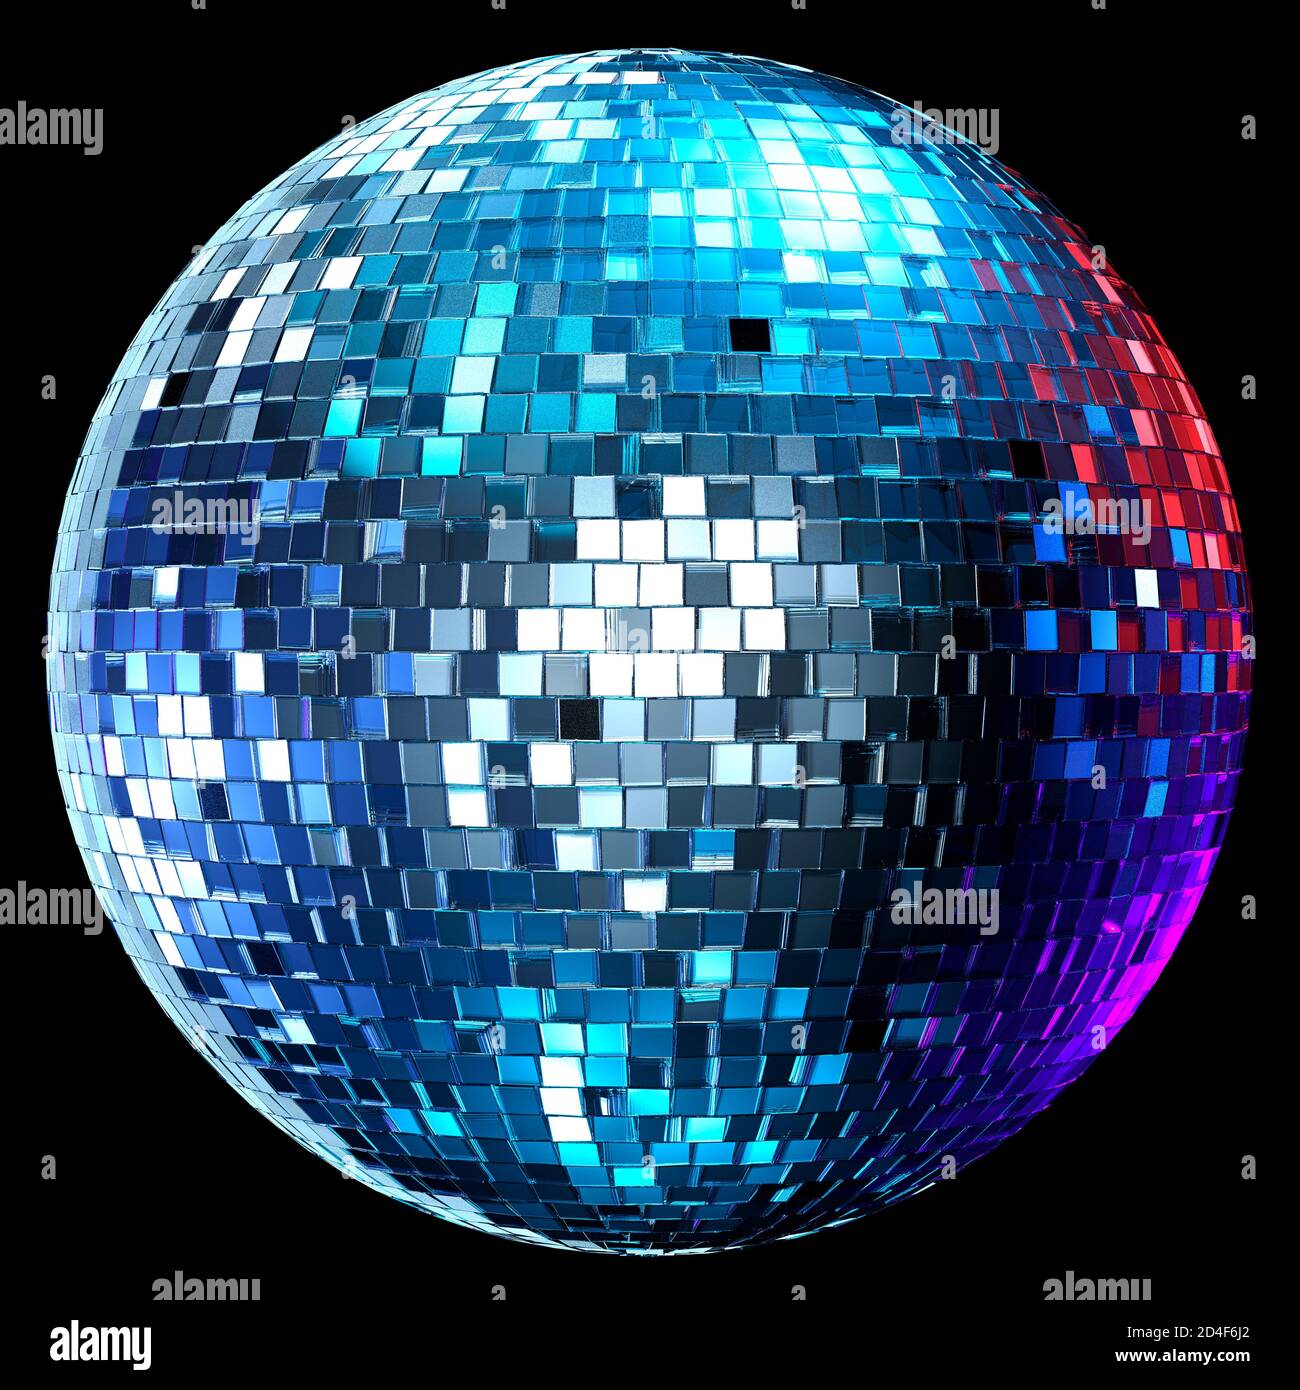 StrictlyStrictly come Dancing Mirrorball Disco ball  Cut out, black background. Nightclub. Nightlife. Stock Photo